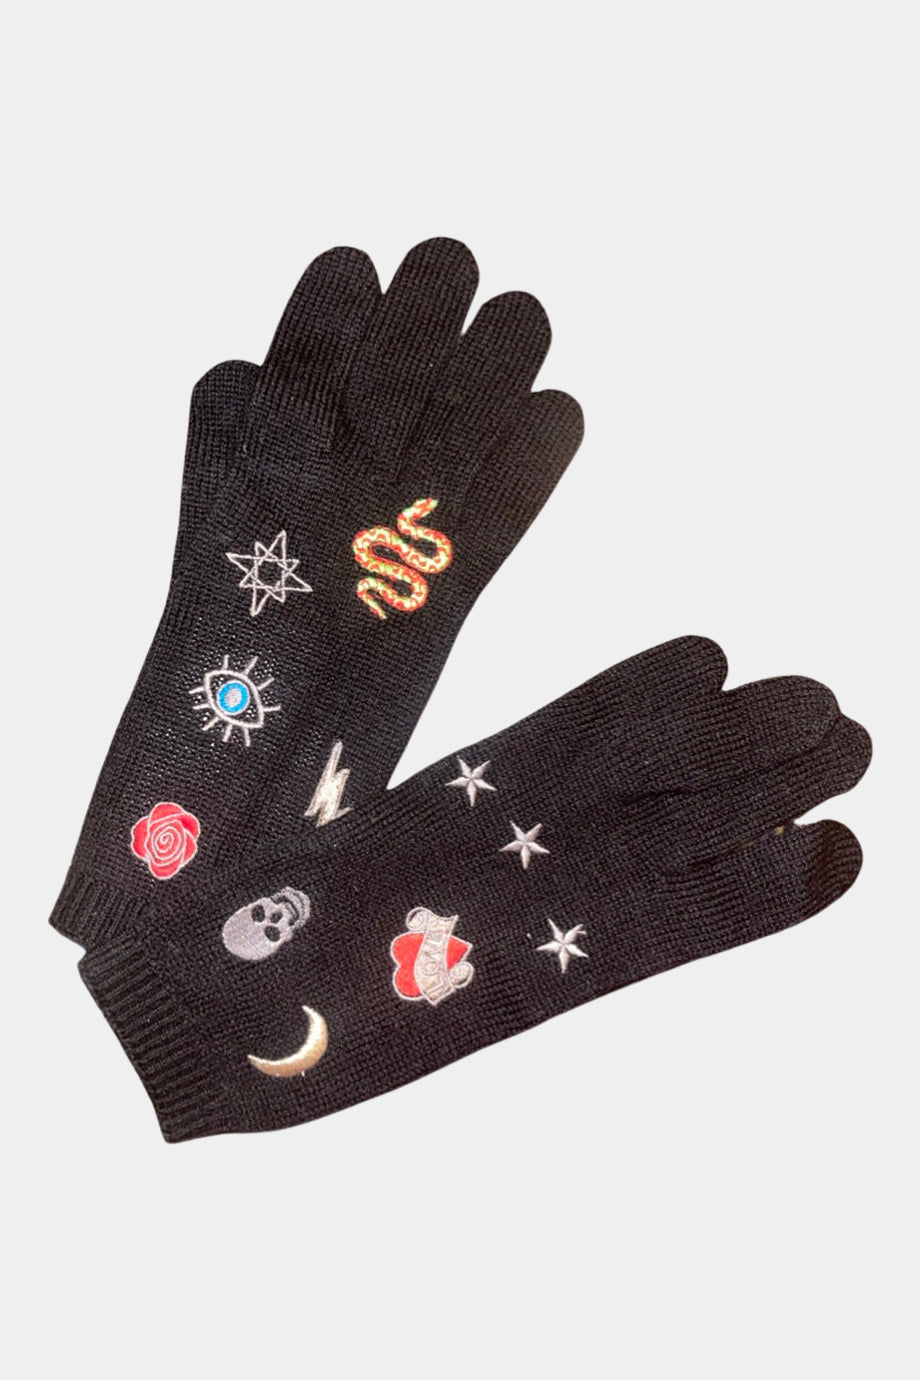 Merino Finger Gloves W. Mixed Patches